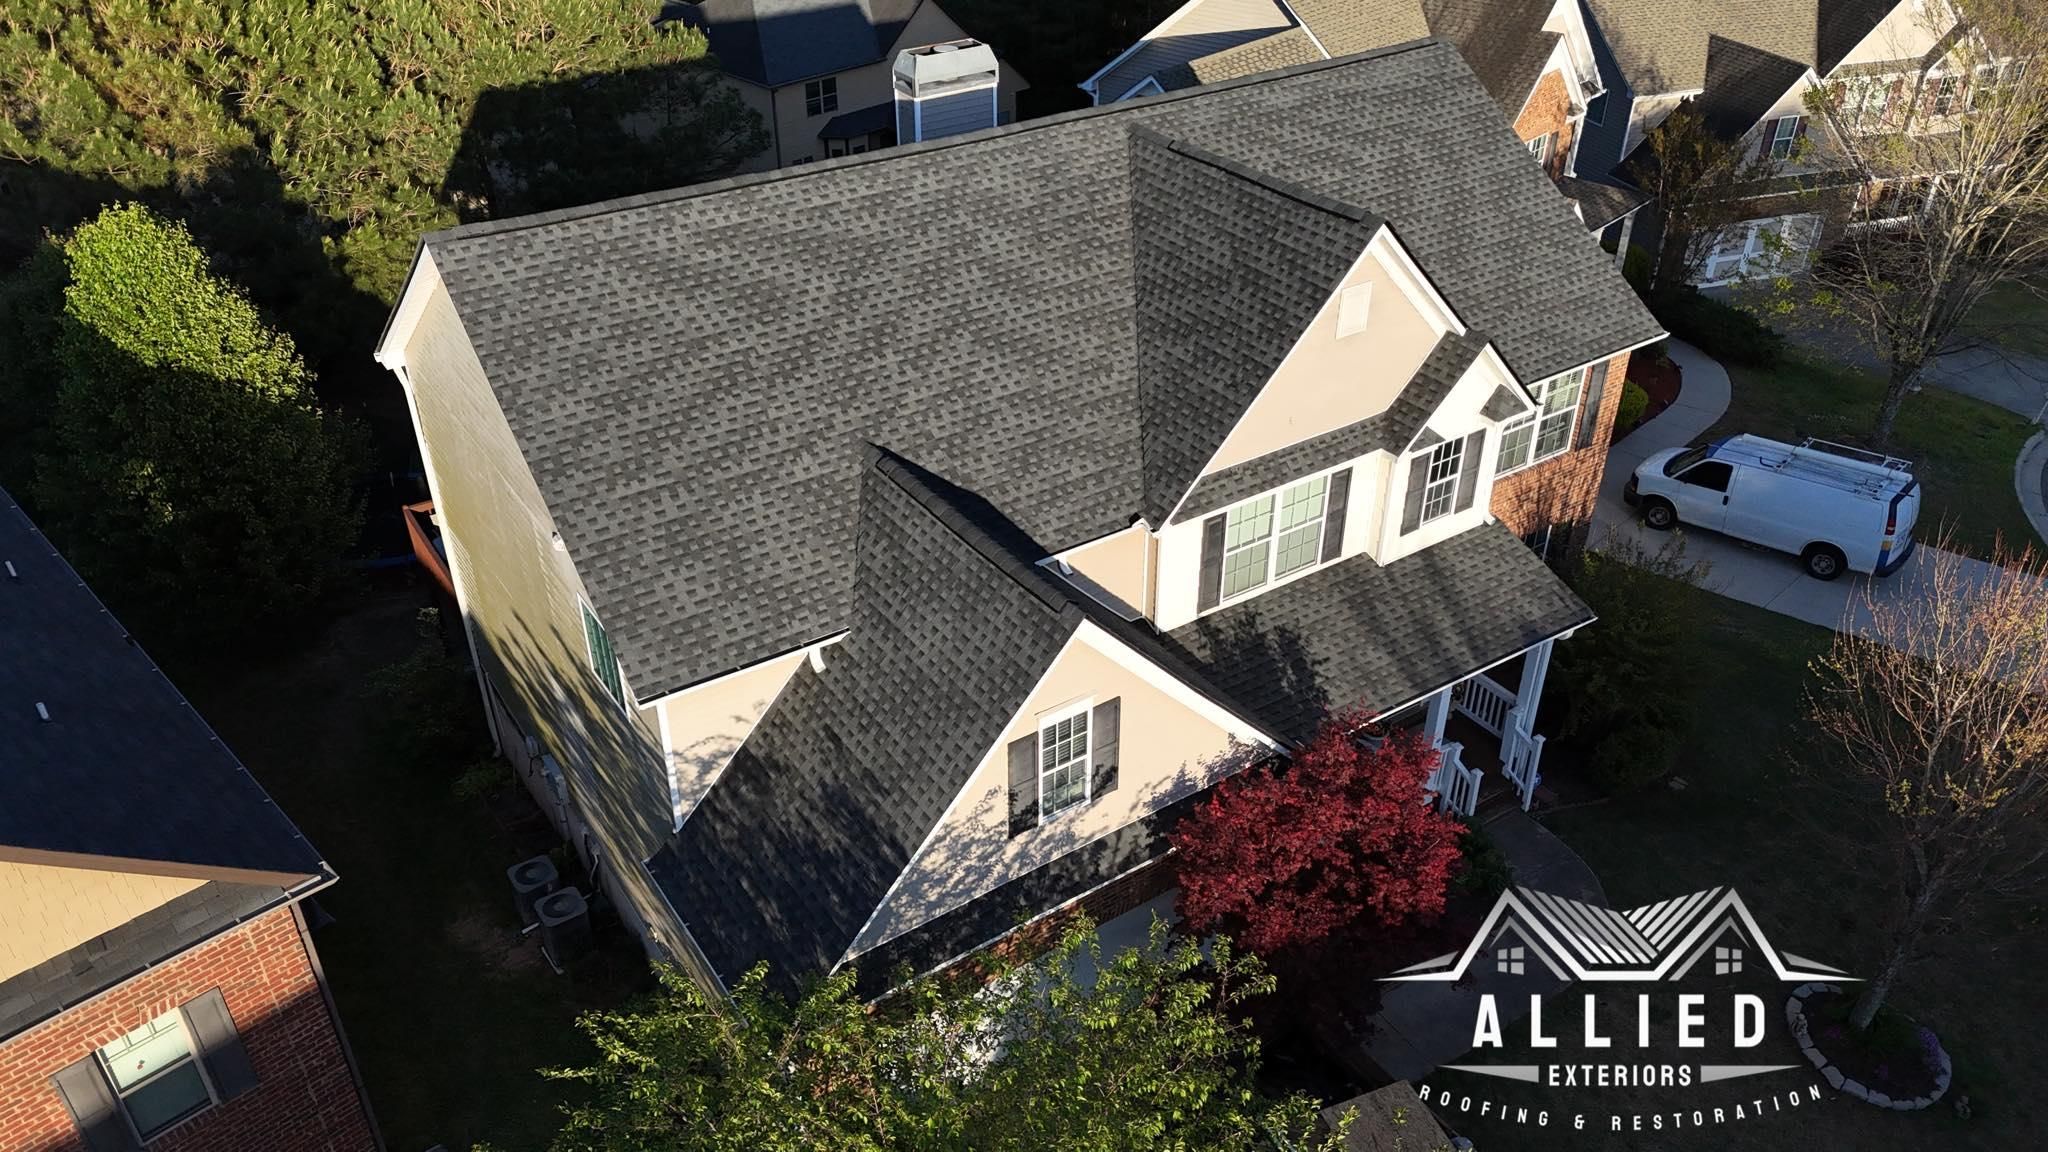  for Allied Exteriors in Buford, GA